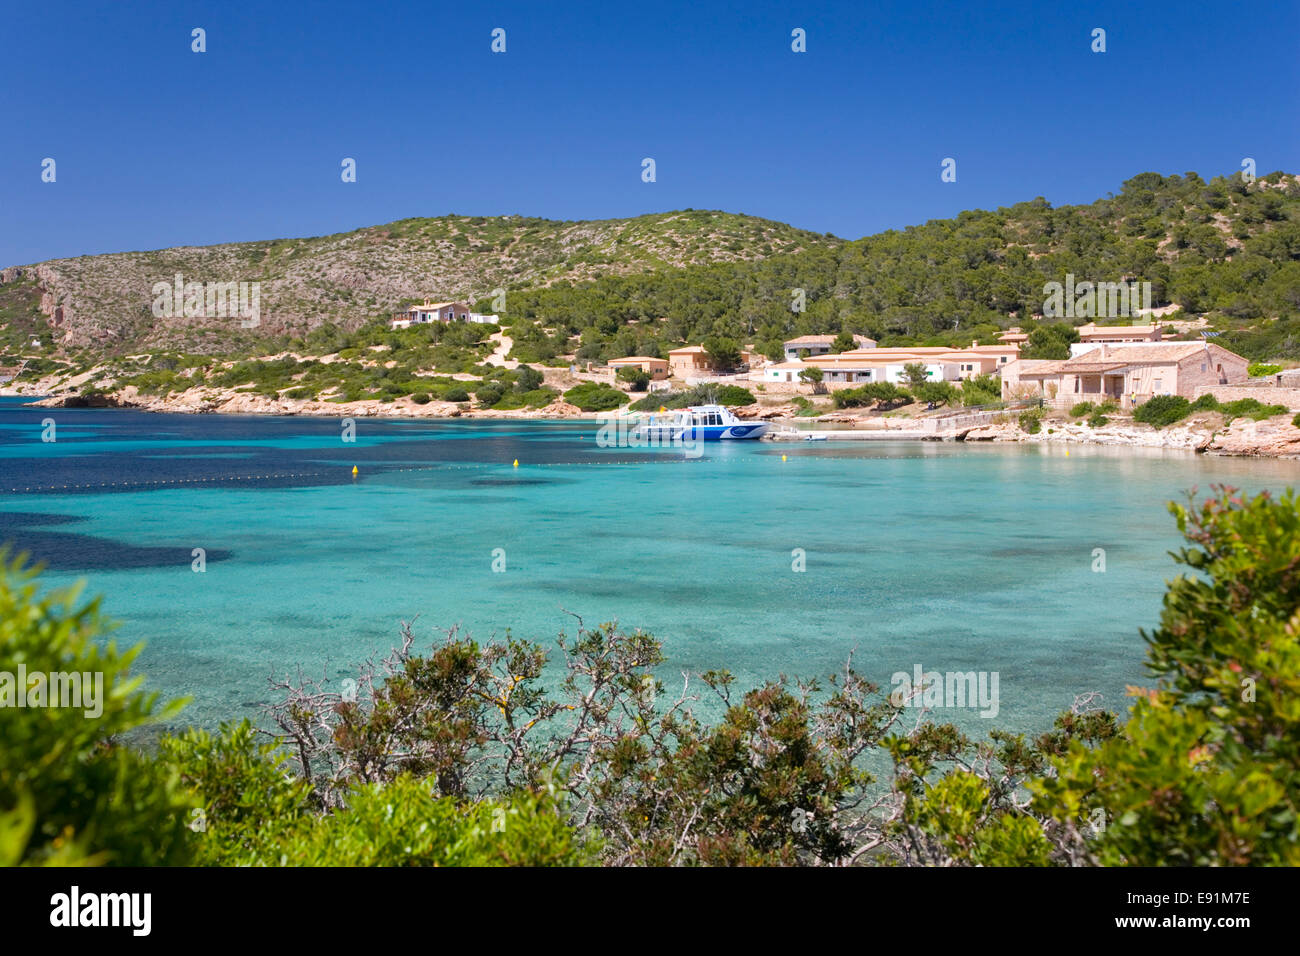 Island of Cabrera, Mallorca, Balearic Islands, Spain. View across bay to waterside houses, boat at quayside. Stock Photo